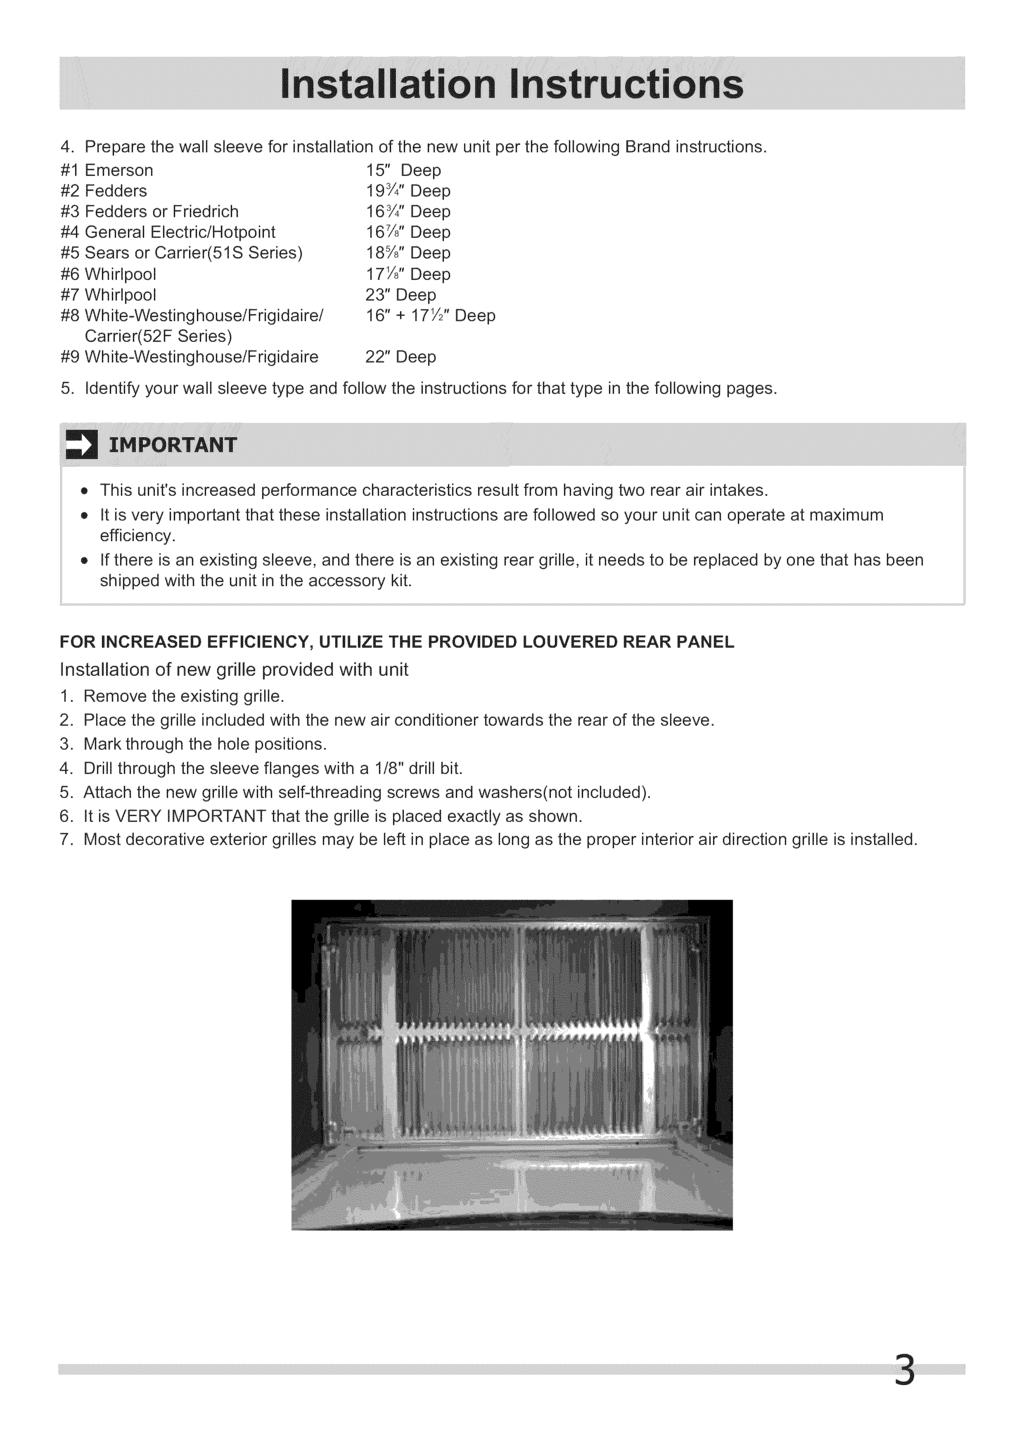 4. Prepare the wall sleeve for installation of the new unit per the following Brand instructions.